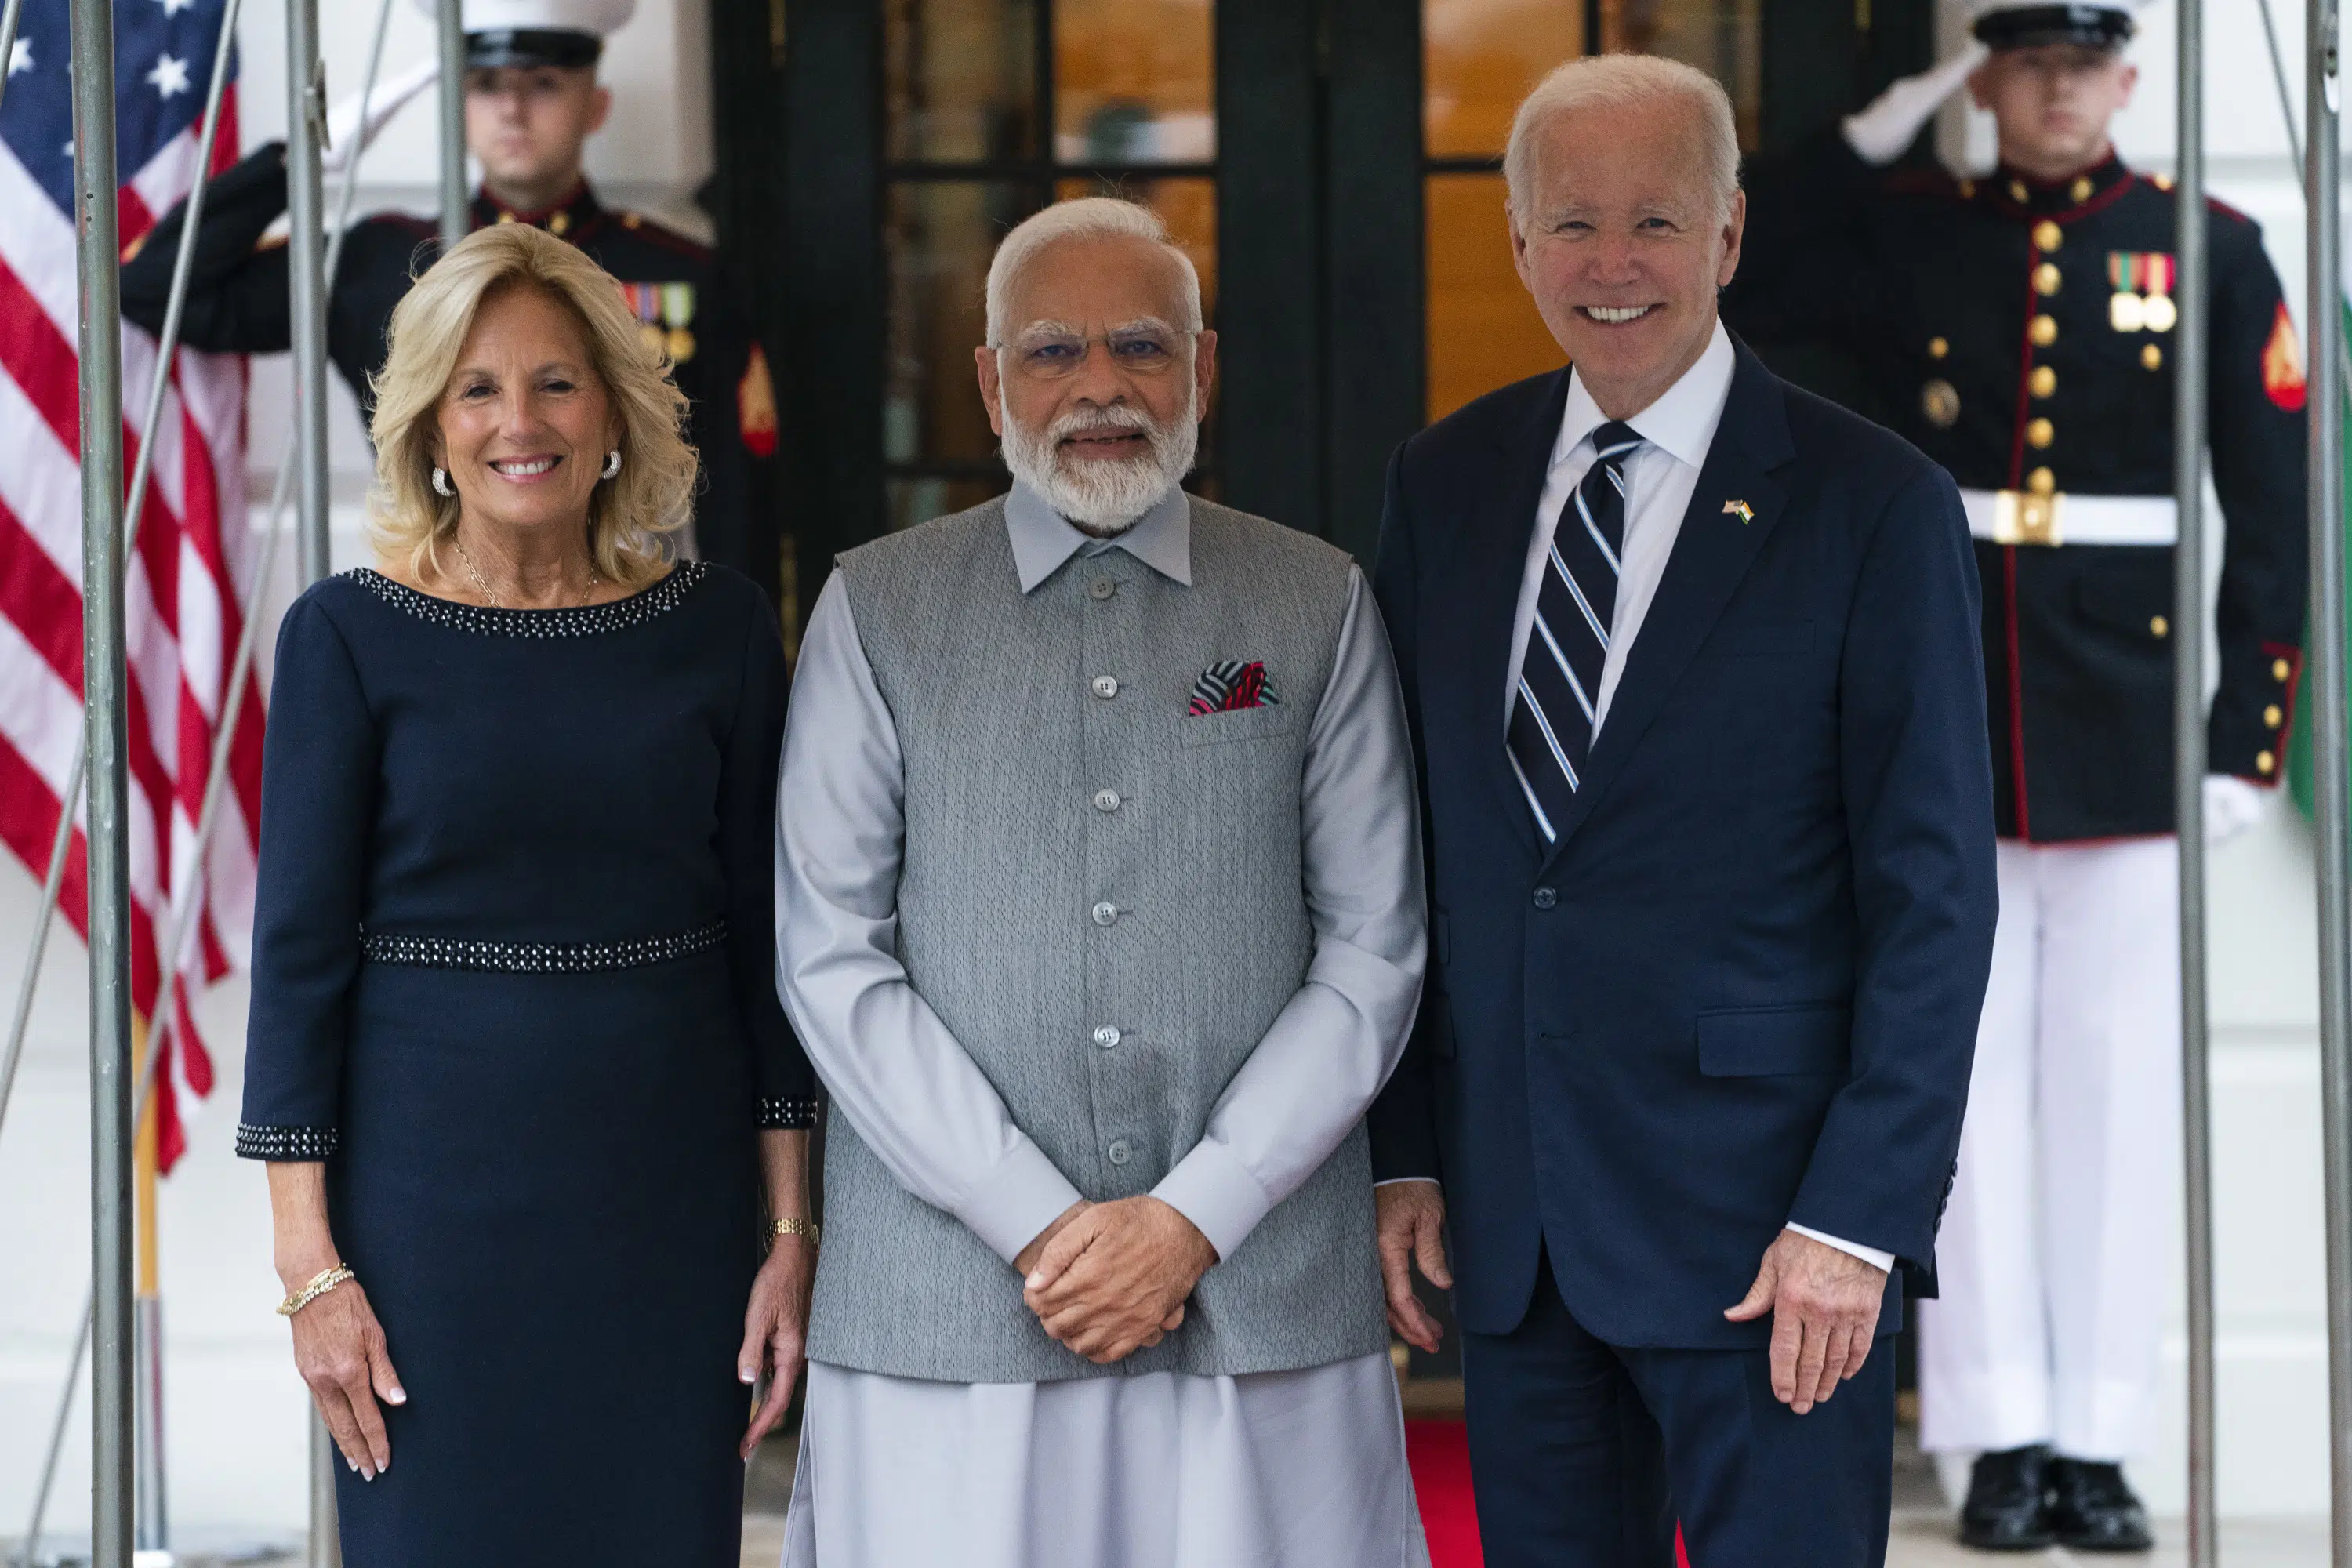 India's Modi is getting a state visit with Biden, but the glitz is shadowed by human rights concerns